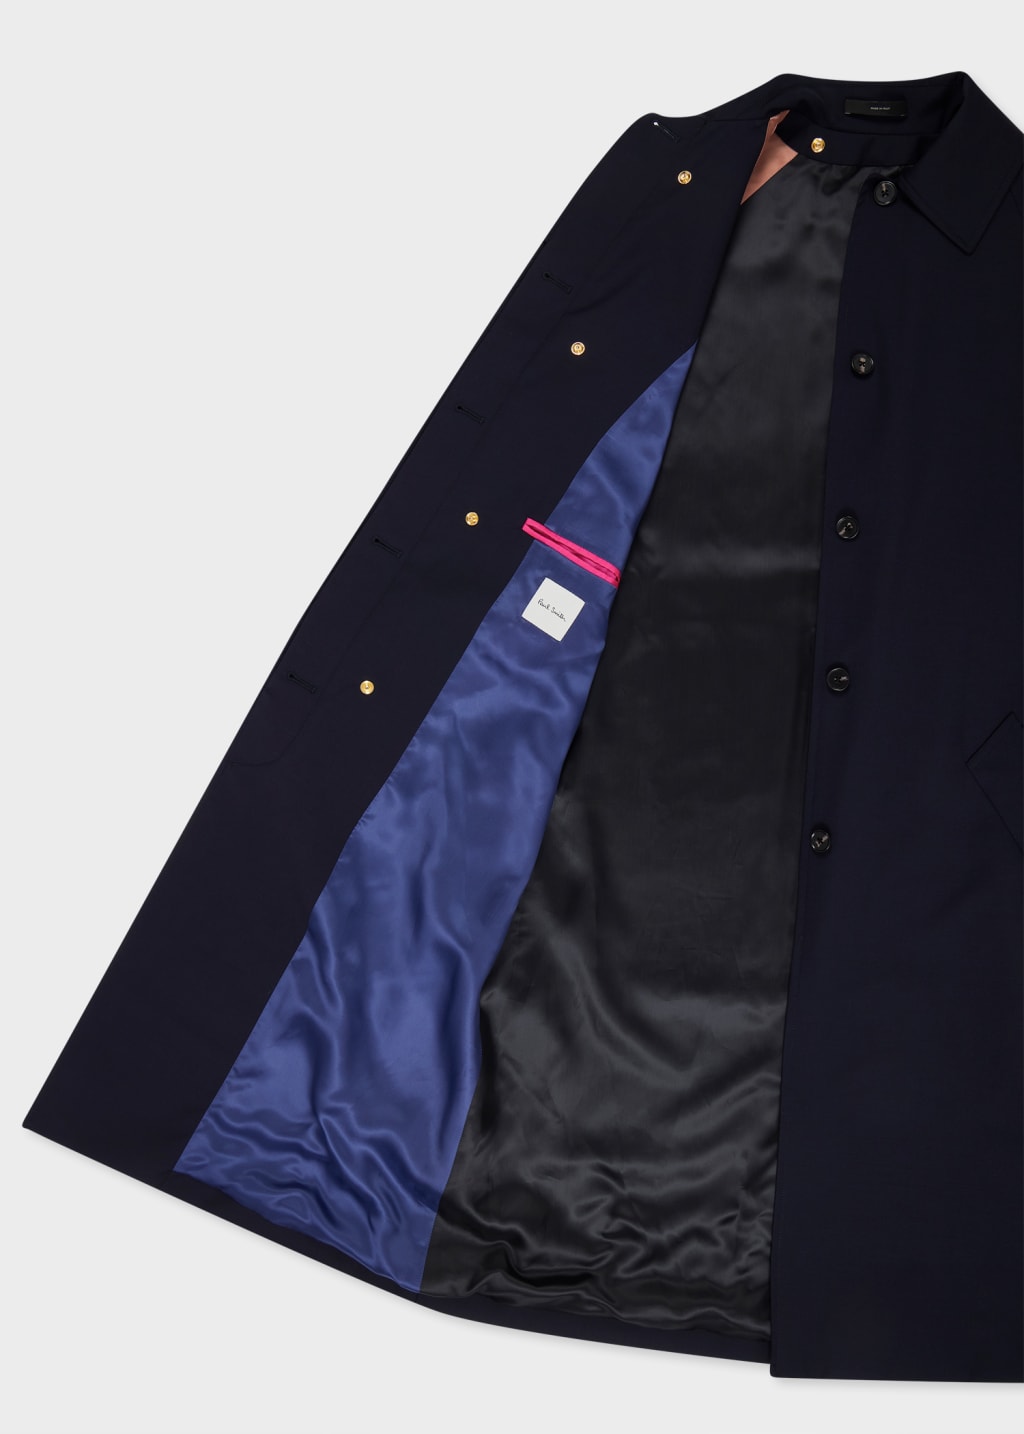 Detail View - Women's Navy 'Storm System Wool' Mac With Detachable Liner Paul Smith